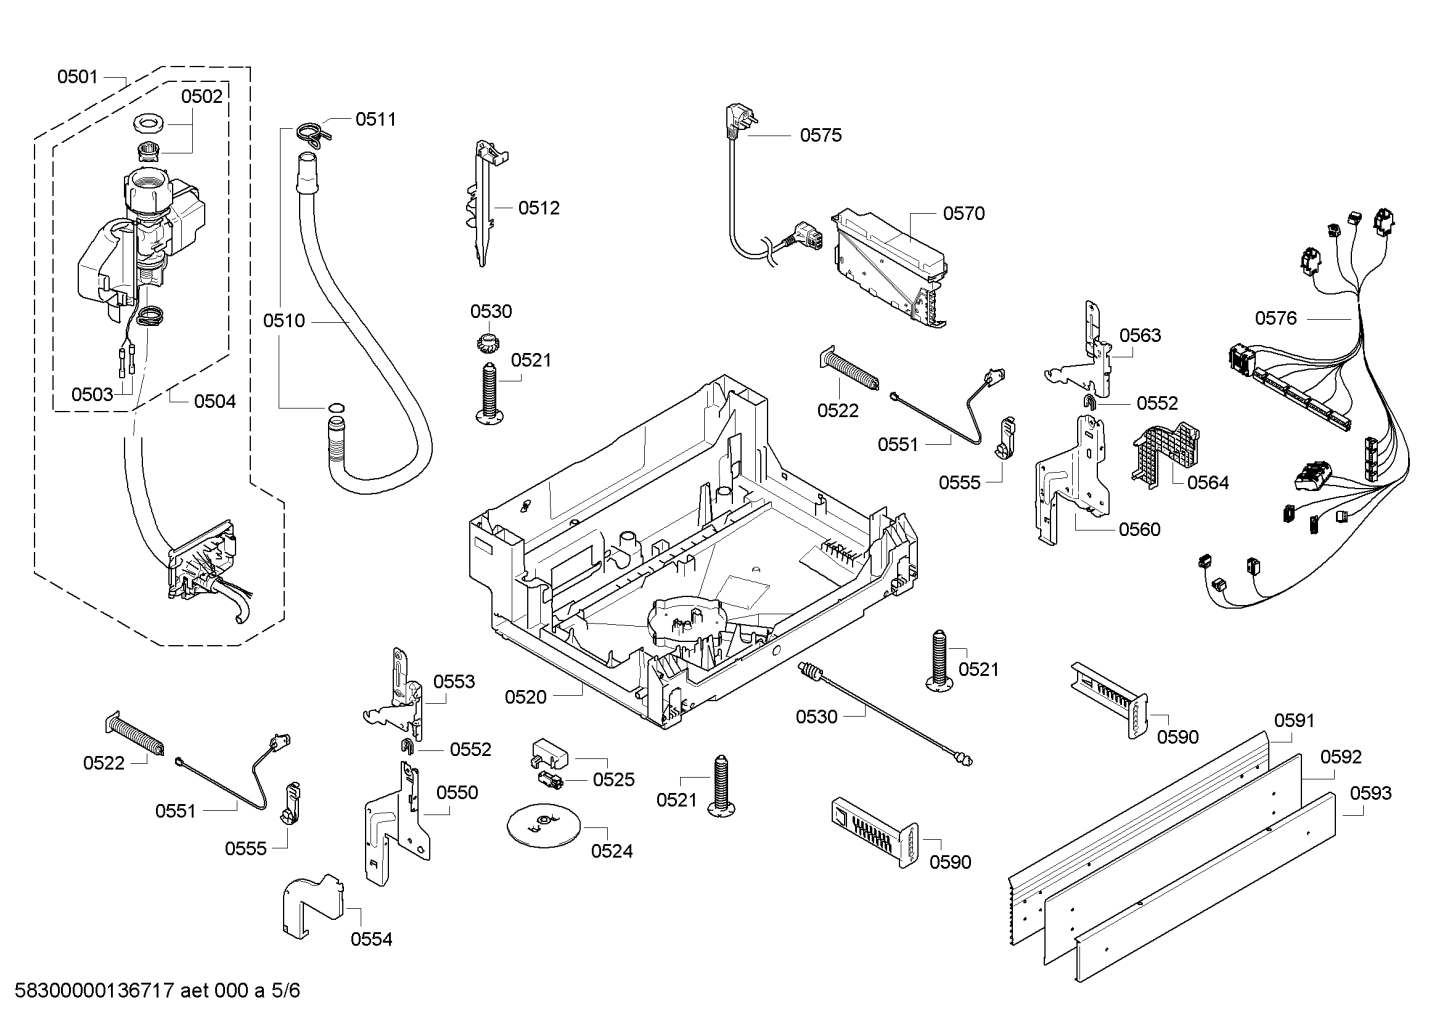 drawing_link_5_device_1587914